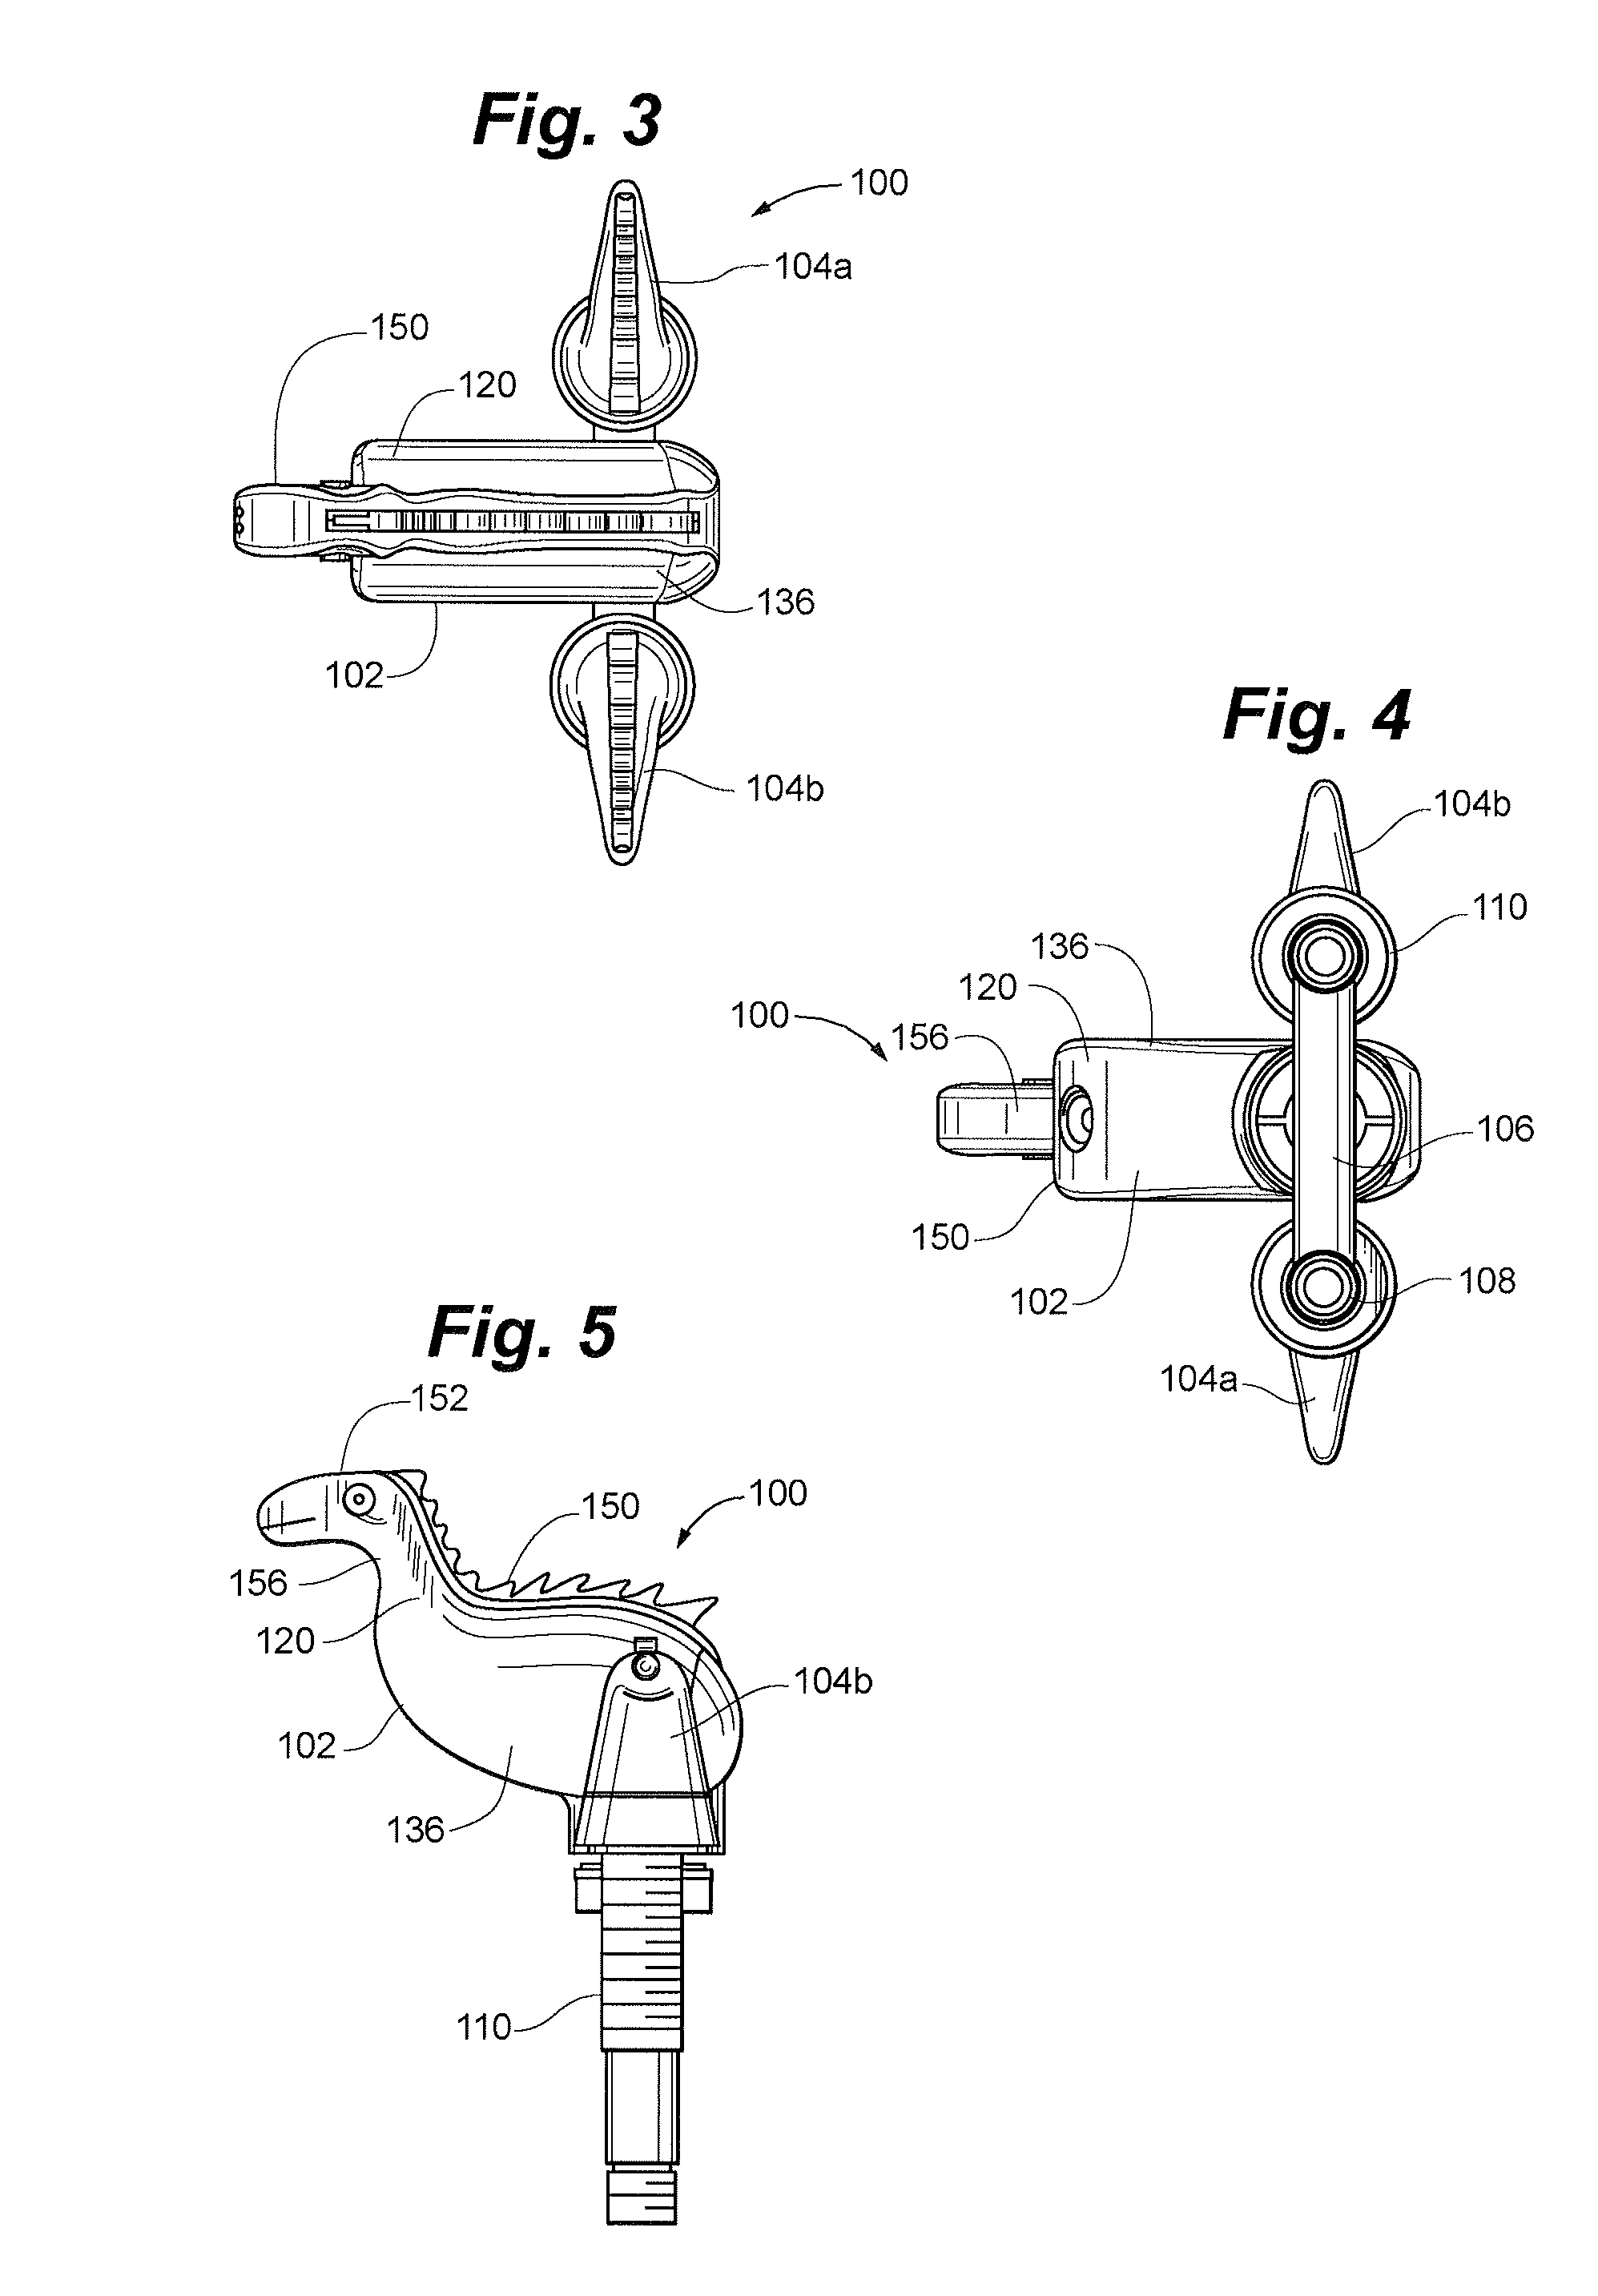 Method and apparatus for soft-feel plumbing fixtures